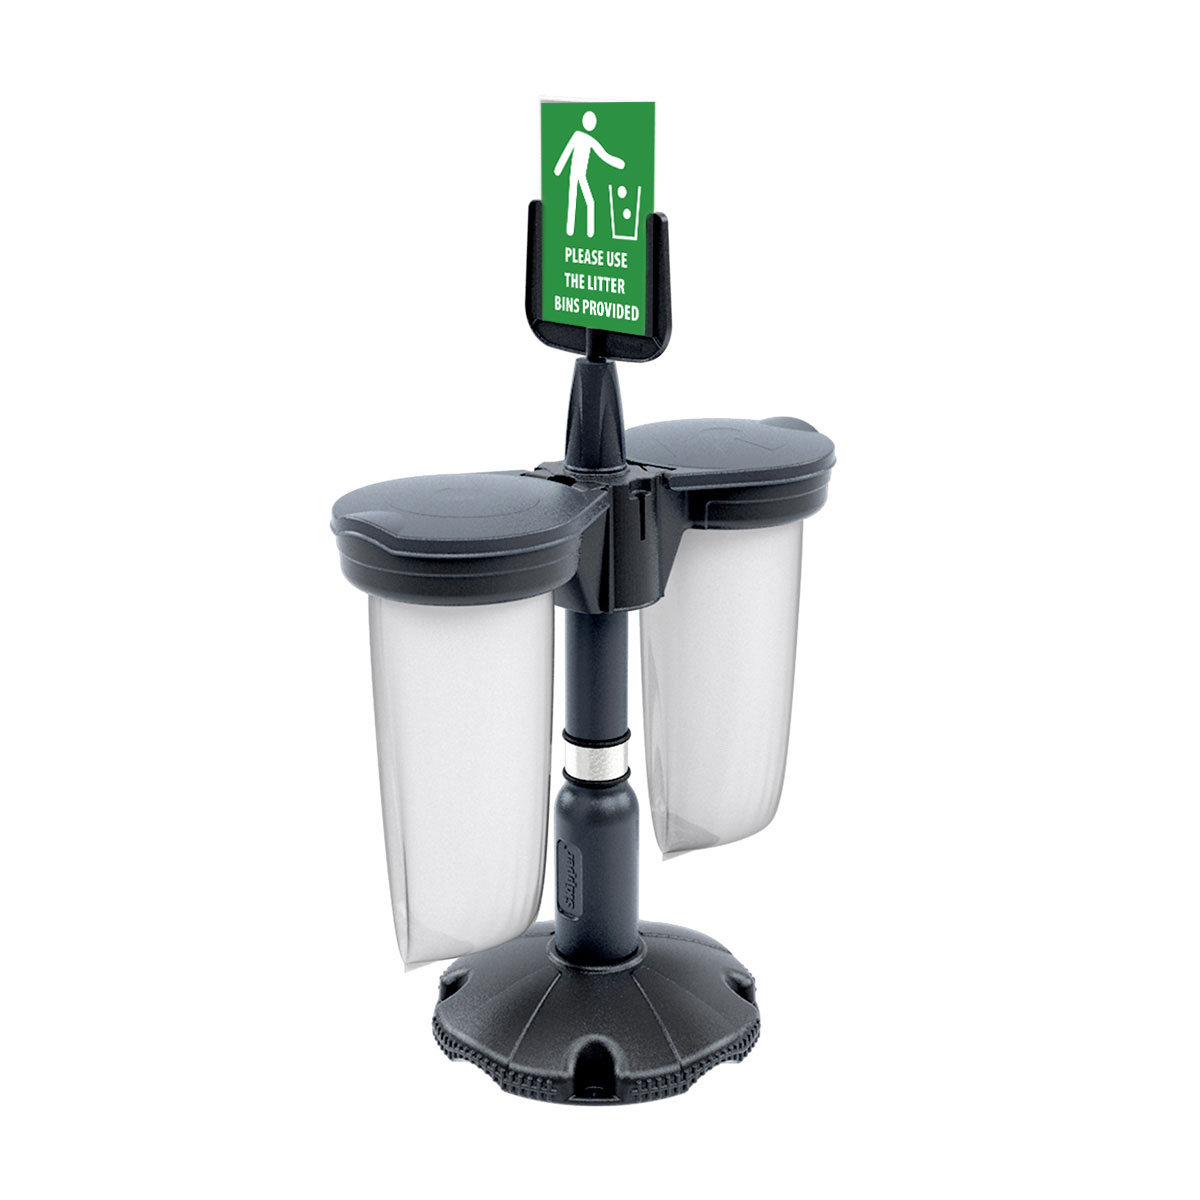 Skipper Safety Station With Two Recycling Bins And Information Sign Holder in Silver